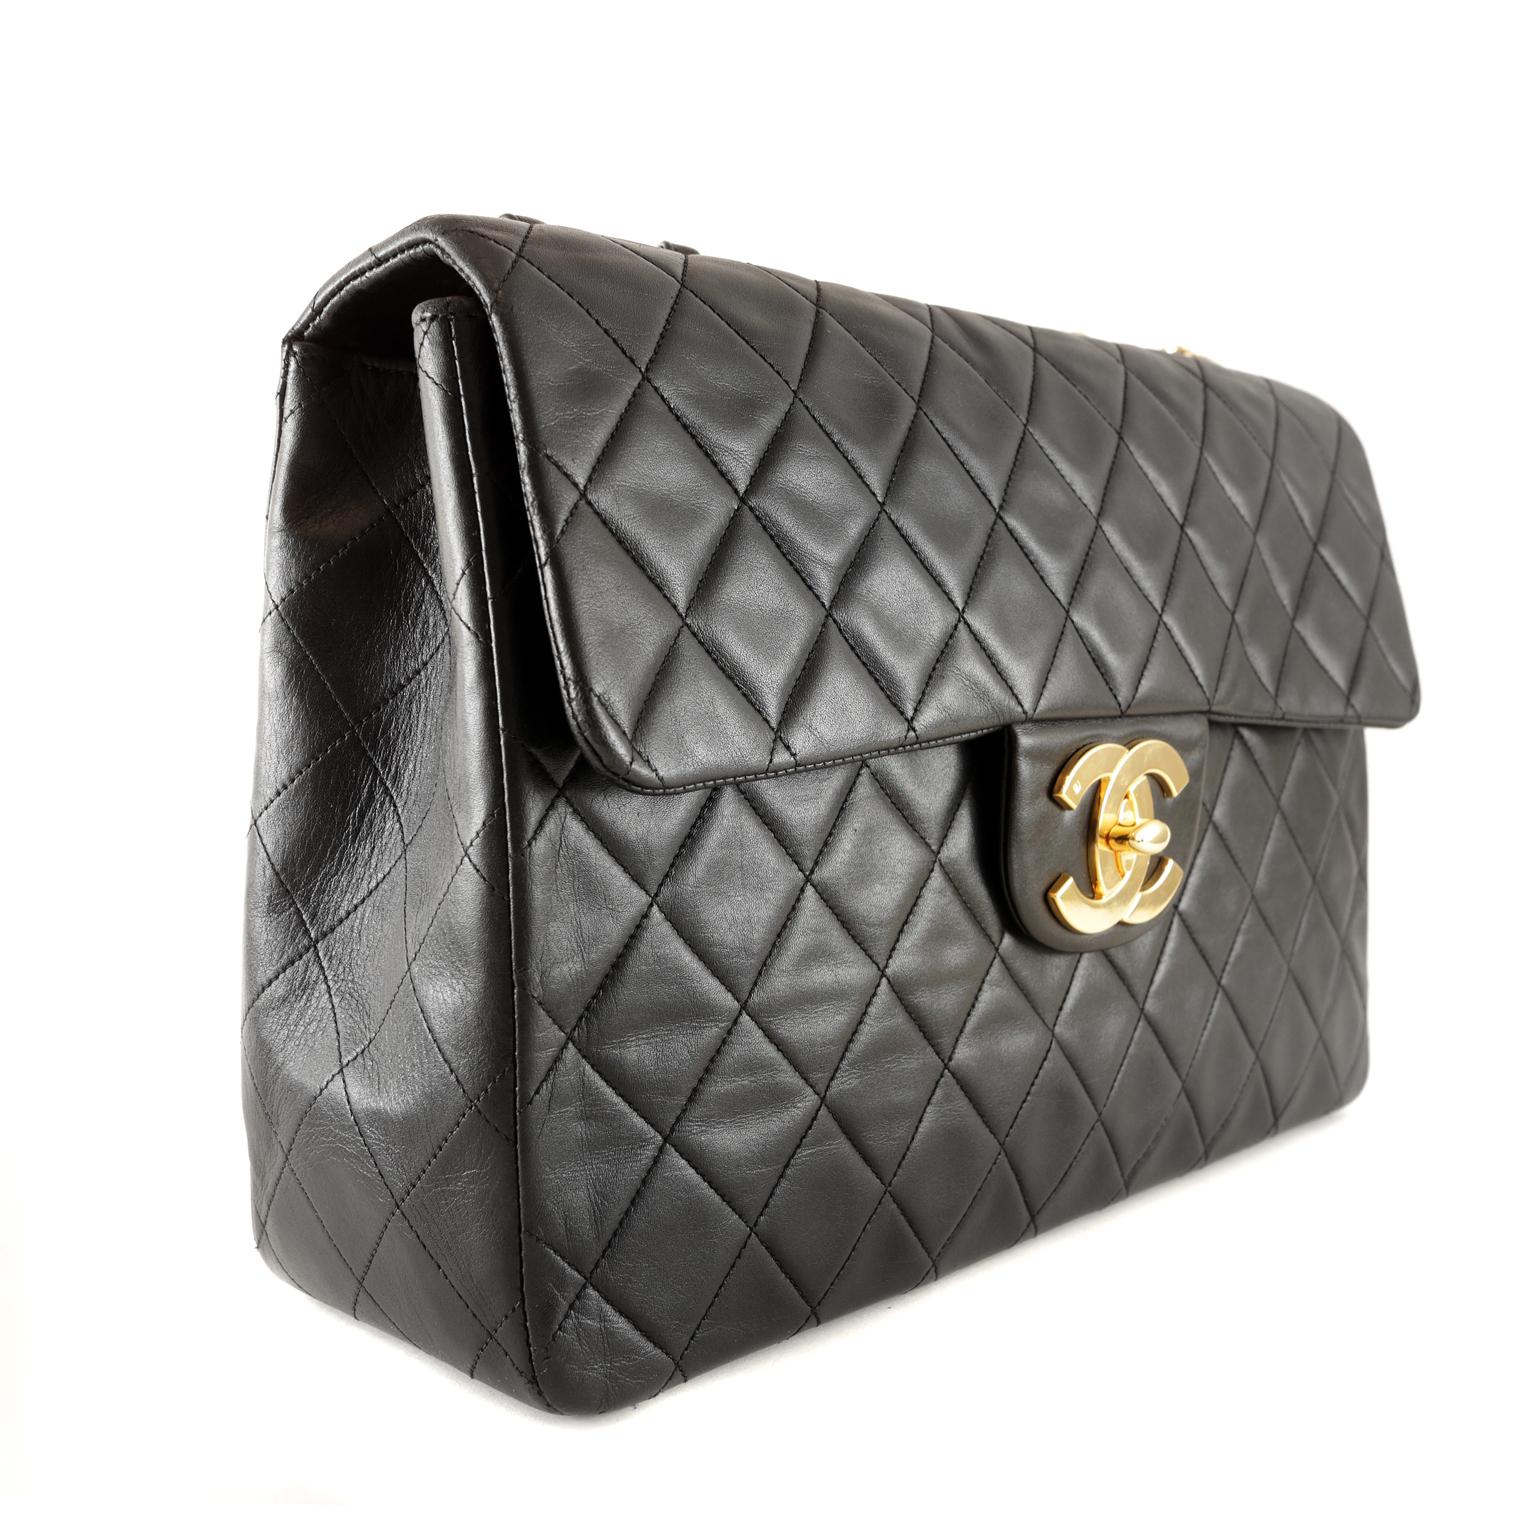 Chanel Black Leather Vintage Classic Flap- excellent plus condition
The timeless style is a must have for any sophisticated wardrobe.  
Black leather is quilted in signature Chanel diamond pattern.  Oversized gold interlocking CC twist lock secures